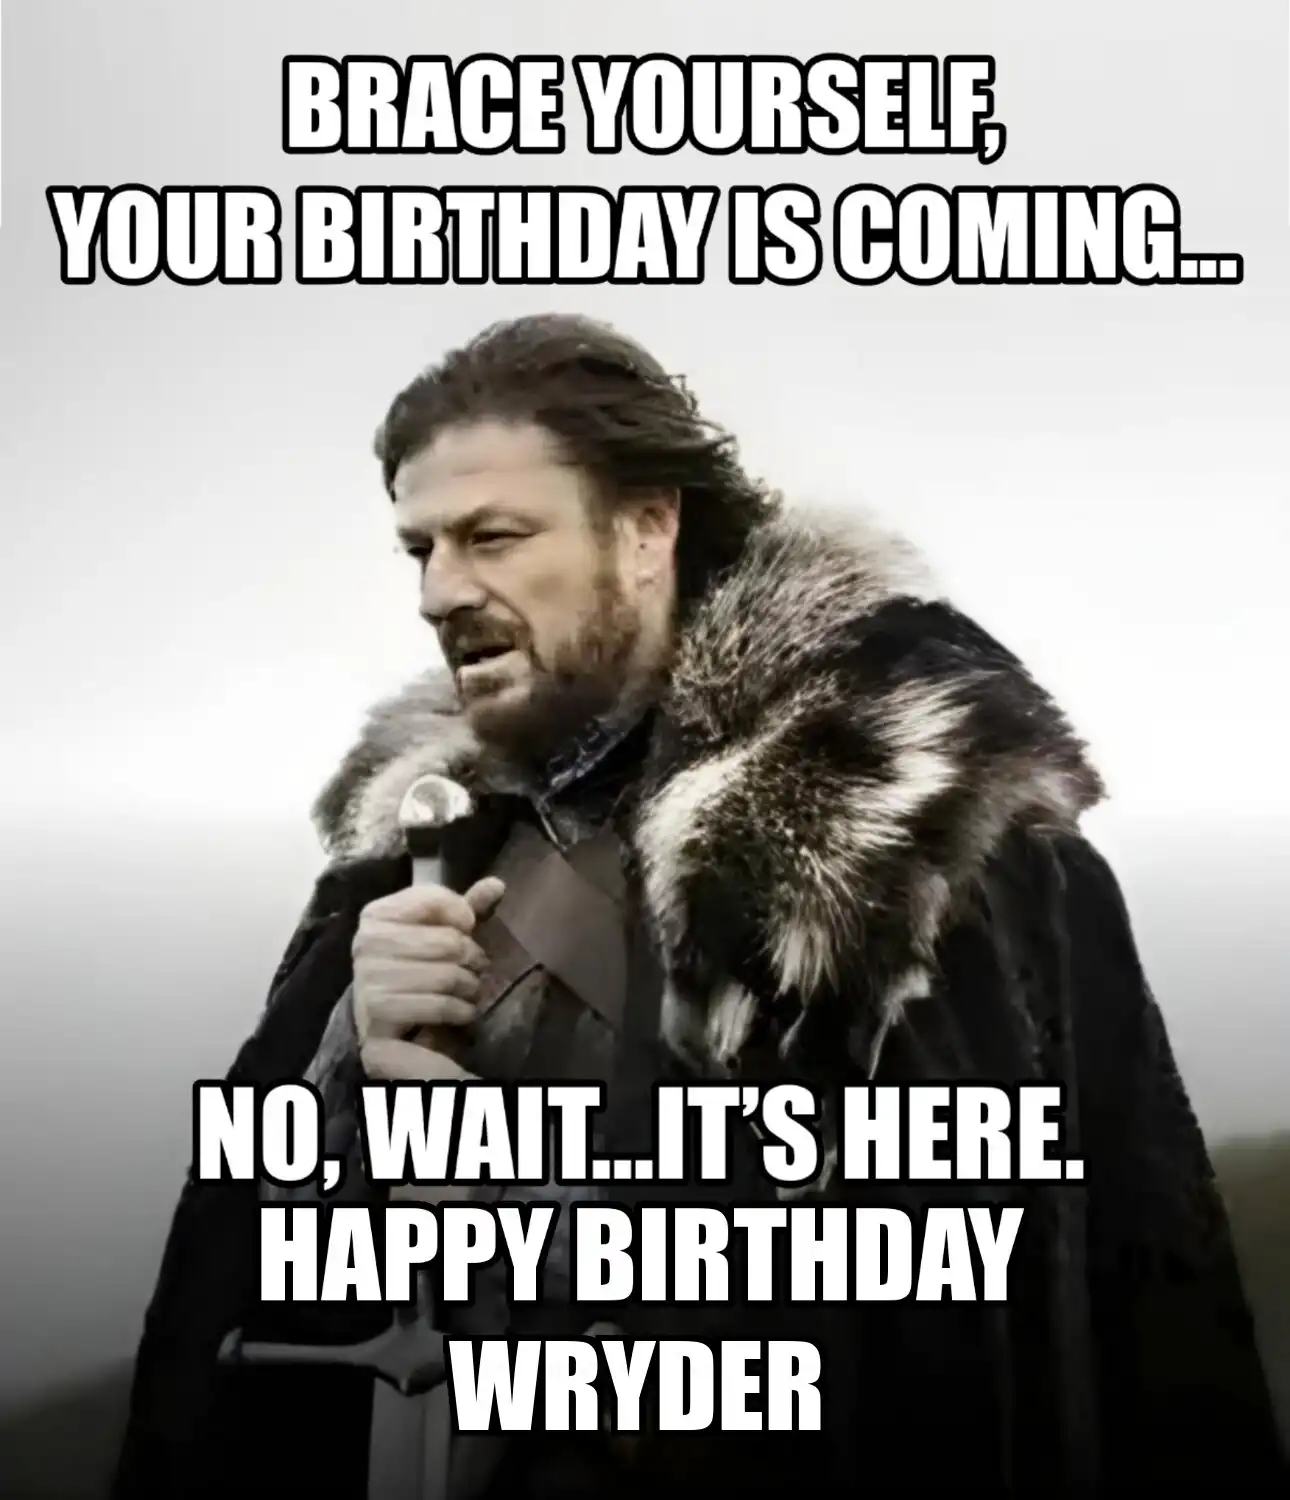 Happy Birthday Wryder Brace Yourself Your Birthday Is Coming Meme